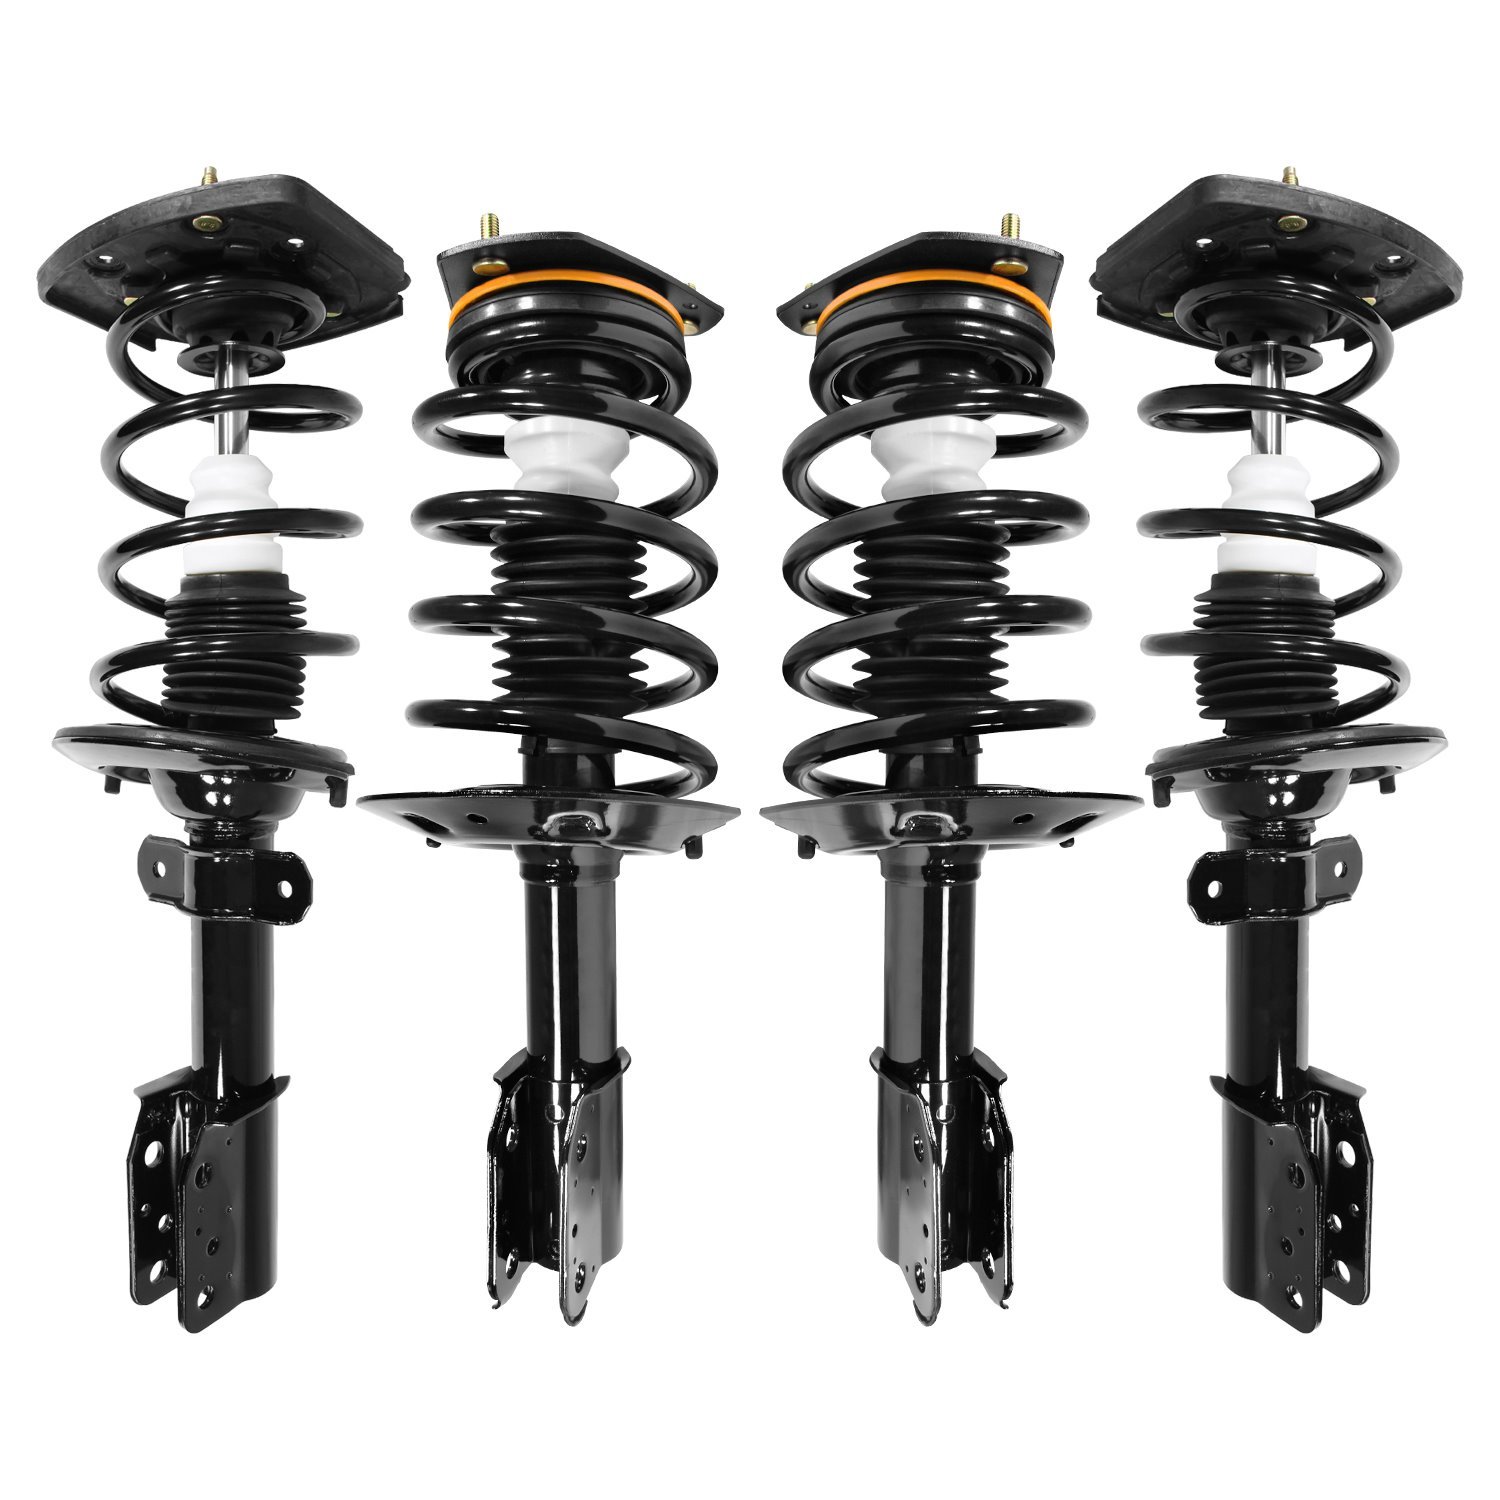 4-11130-15061-001 Front & Rear Suspension Strut & Coil Spring Assembly Kit Fits Select Chevy Impala, Oldsmobile Intrigue